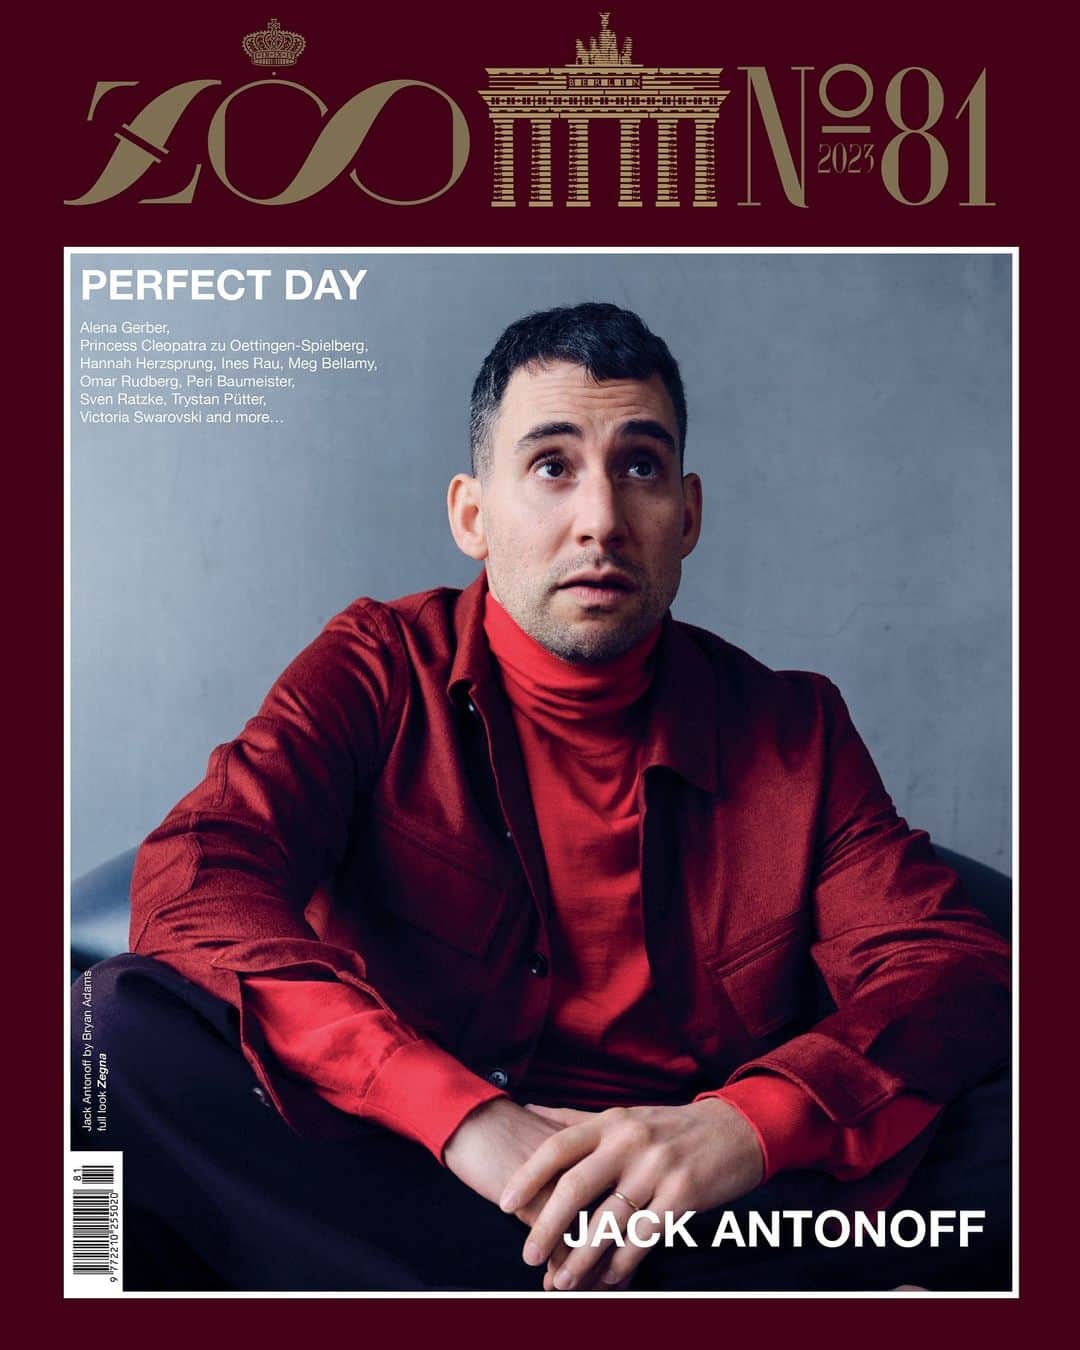 ZOO Magazineのインスタグラム：「ZOO MAGAZINE ISSUE #81: A PERFECT DAY  Jack Antonoff by Bryan Adams shot and interviewed exclusively for ZOO MAGAZINE 81 - ZOO MAGAZINE 20 YEARS  Full look: ZEGNA @zegnaofficial @alessandrosartoriofficial  Photographer: Bryan Adams @bryanadams Talent: Jack Antonoff @jackantonoff  Stylist: Tom Kivell @tomkivell_stylist @seemanagement Hair and Makeup: Kevin Ryan @kevinryanhair @artandcommerce  Photographer’s Assistant: Edward Smith Stylist’s Assistants: Peter Hallberg Creative Director: @patriciavillirillo Publicist: @huxley, a special thank you to Nic Bestley and Micaela Cohen  Location: Pier59 Studios, STUDIO 9 @pier59studios Interview: Jim Butler  #ZooMagazine #20YEARSZOOMAGAZINE」